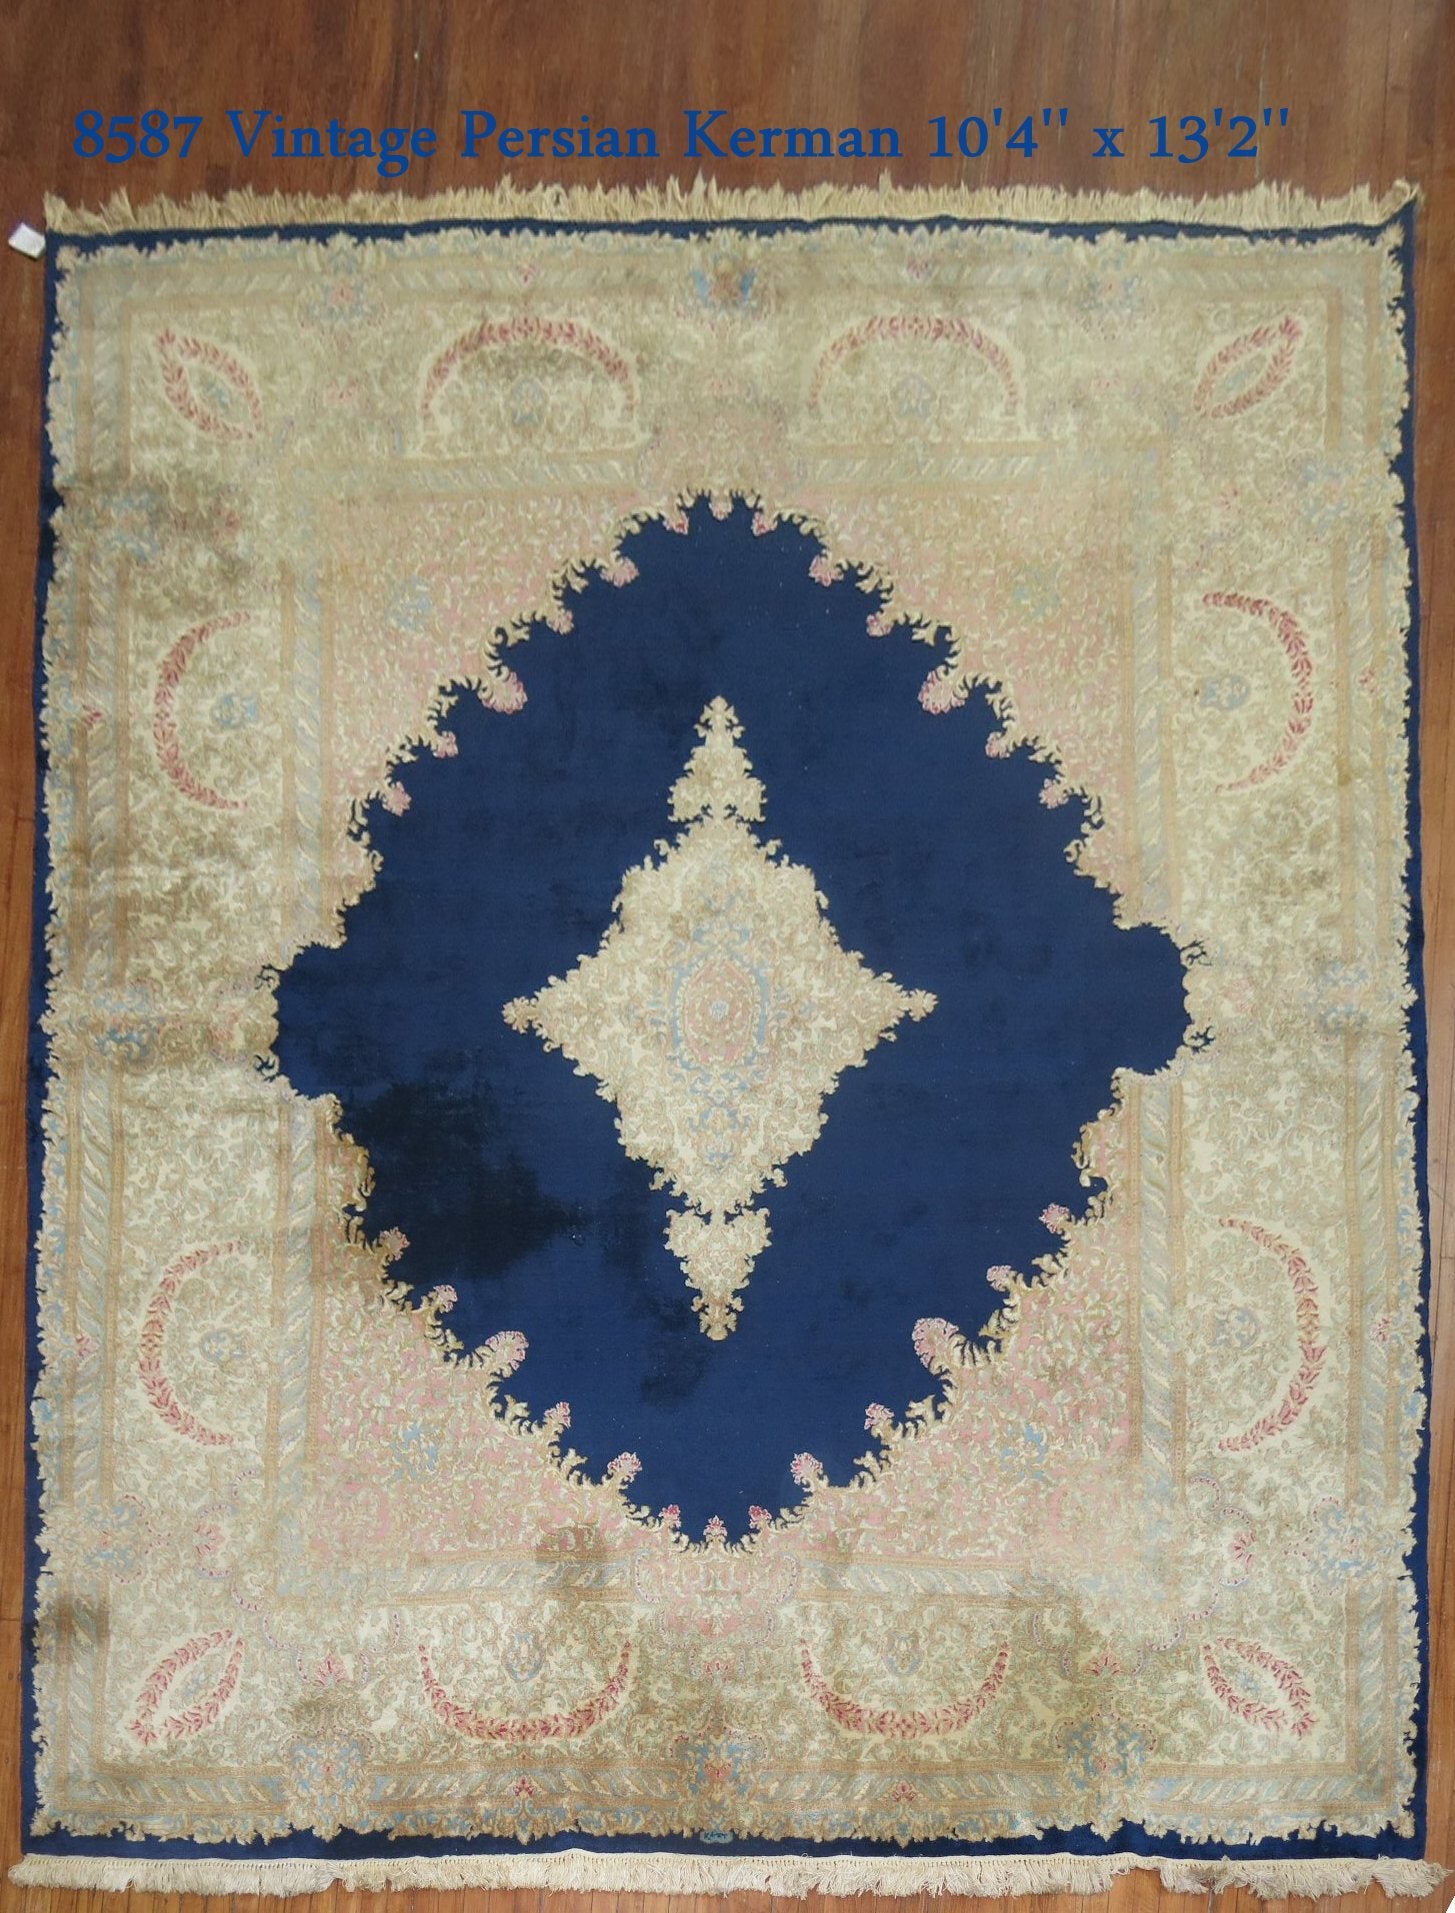 A one of kind signed Persian Kerman Traditional rug from the 2nd quarter of the 20th century

Measures: 10'4